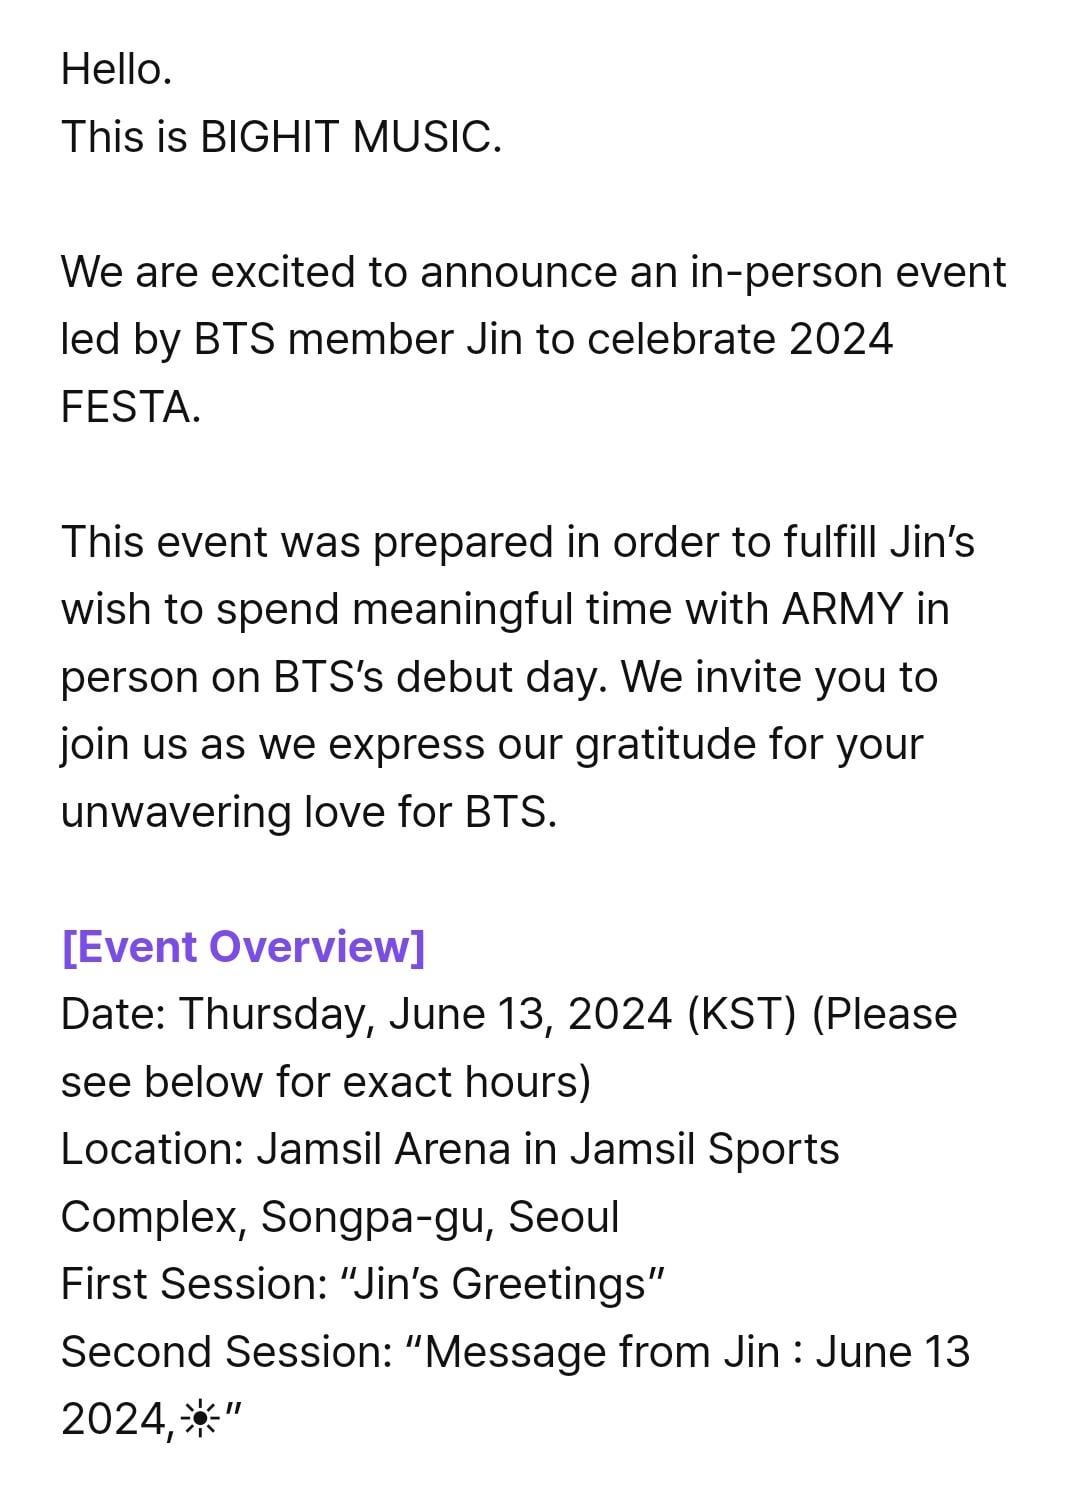 [NOTICE] 2024 FESTA In-person Event with BTS Jin